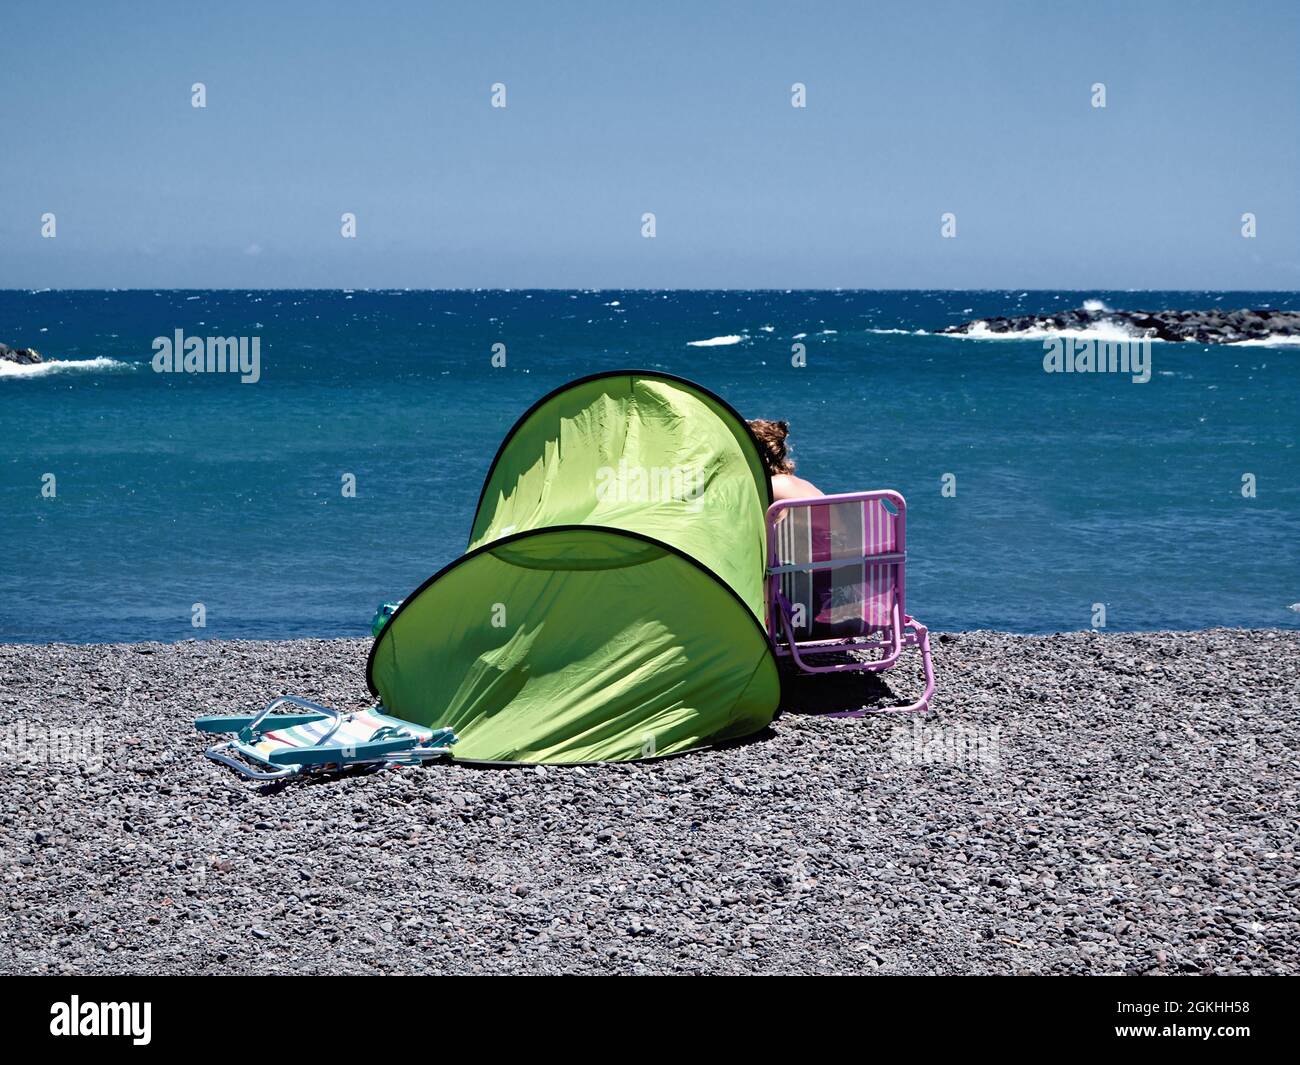 A small barrel-shaped sun protection tent on the pebble beach in front of the Atlantic, next to it a camping chair on which a woman sits looking out t Stock Photo